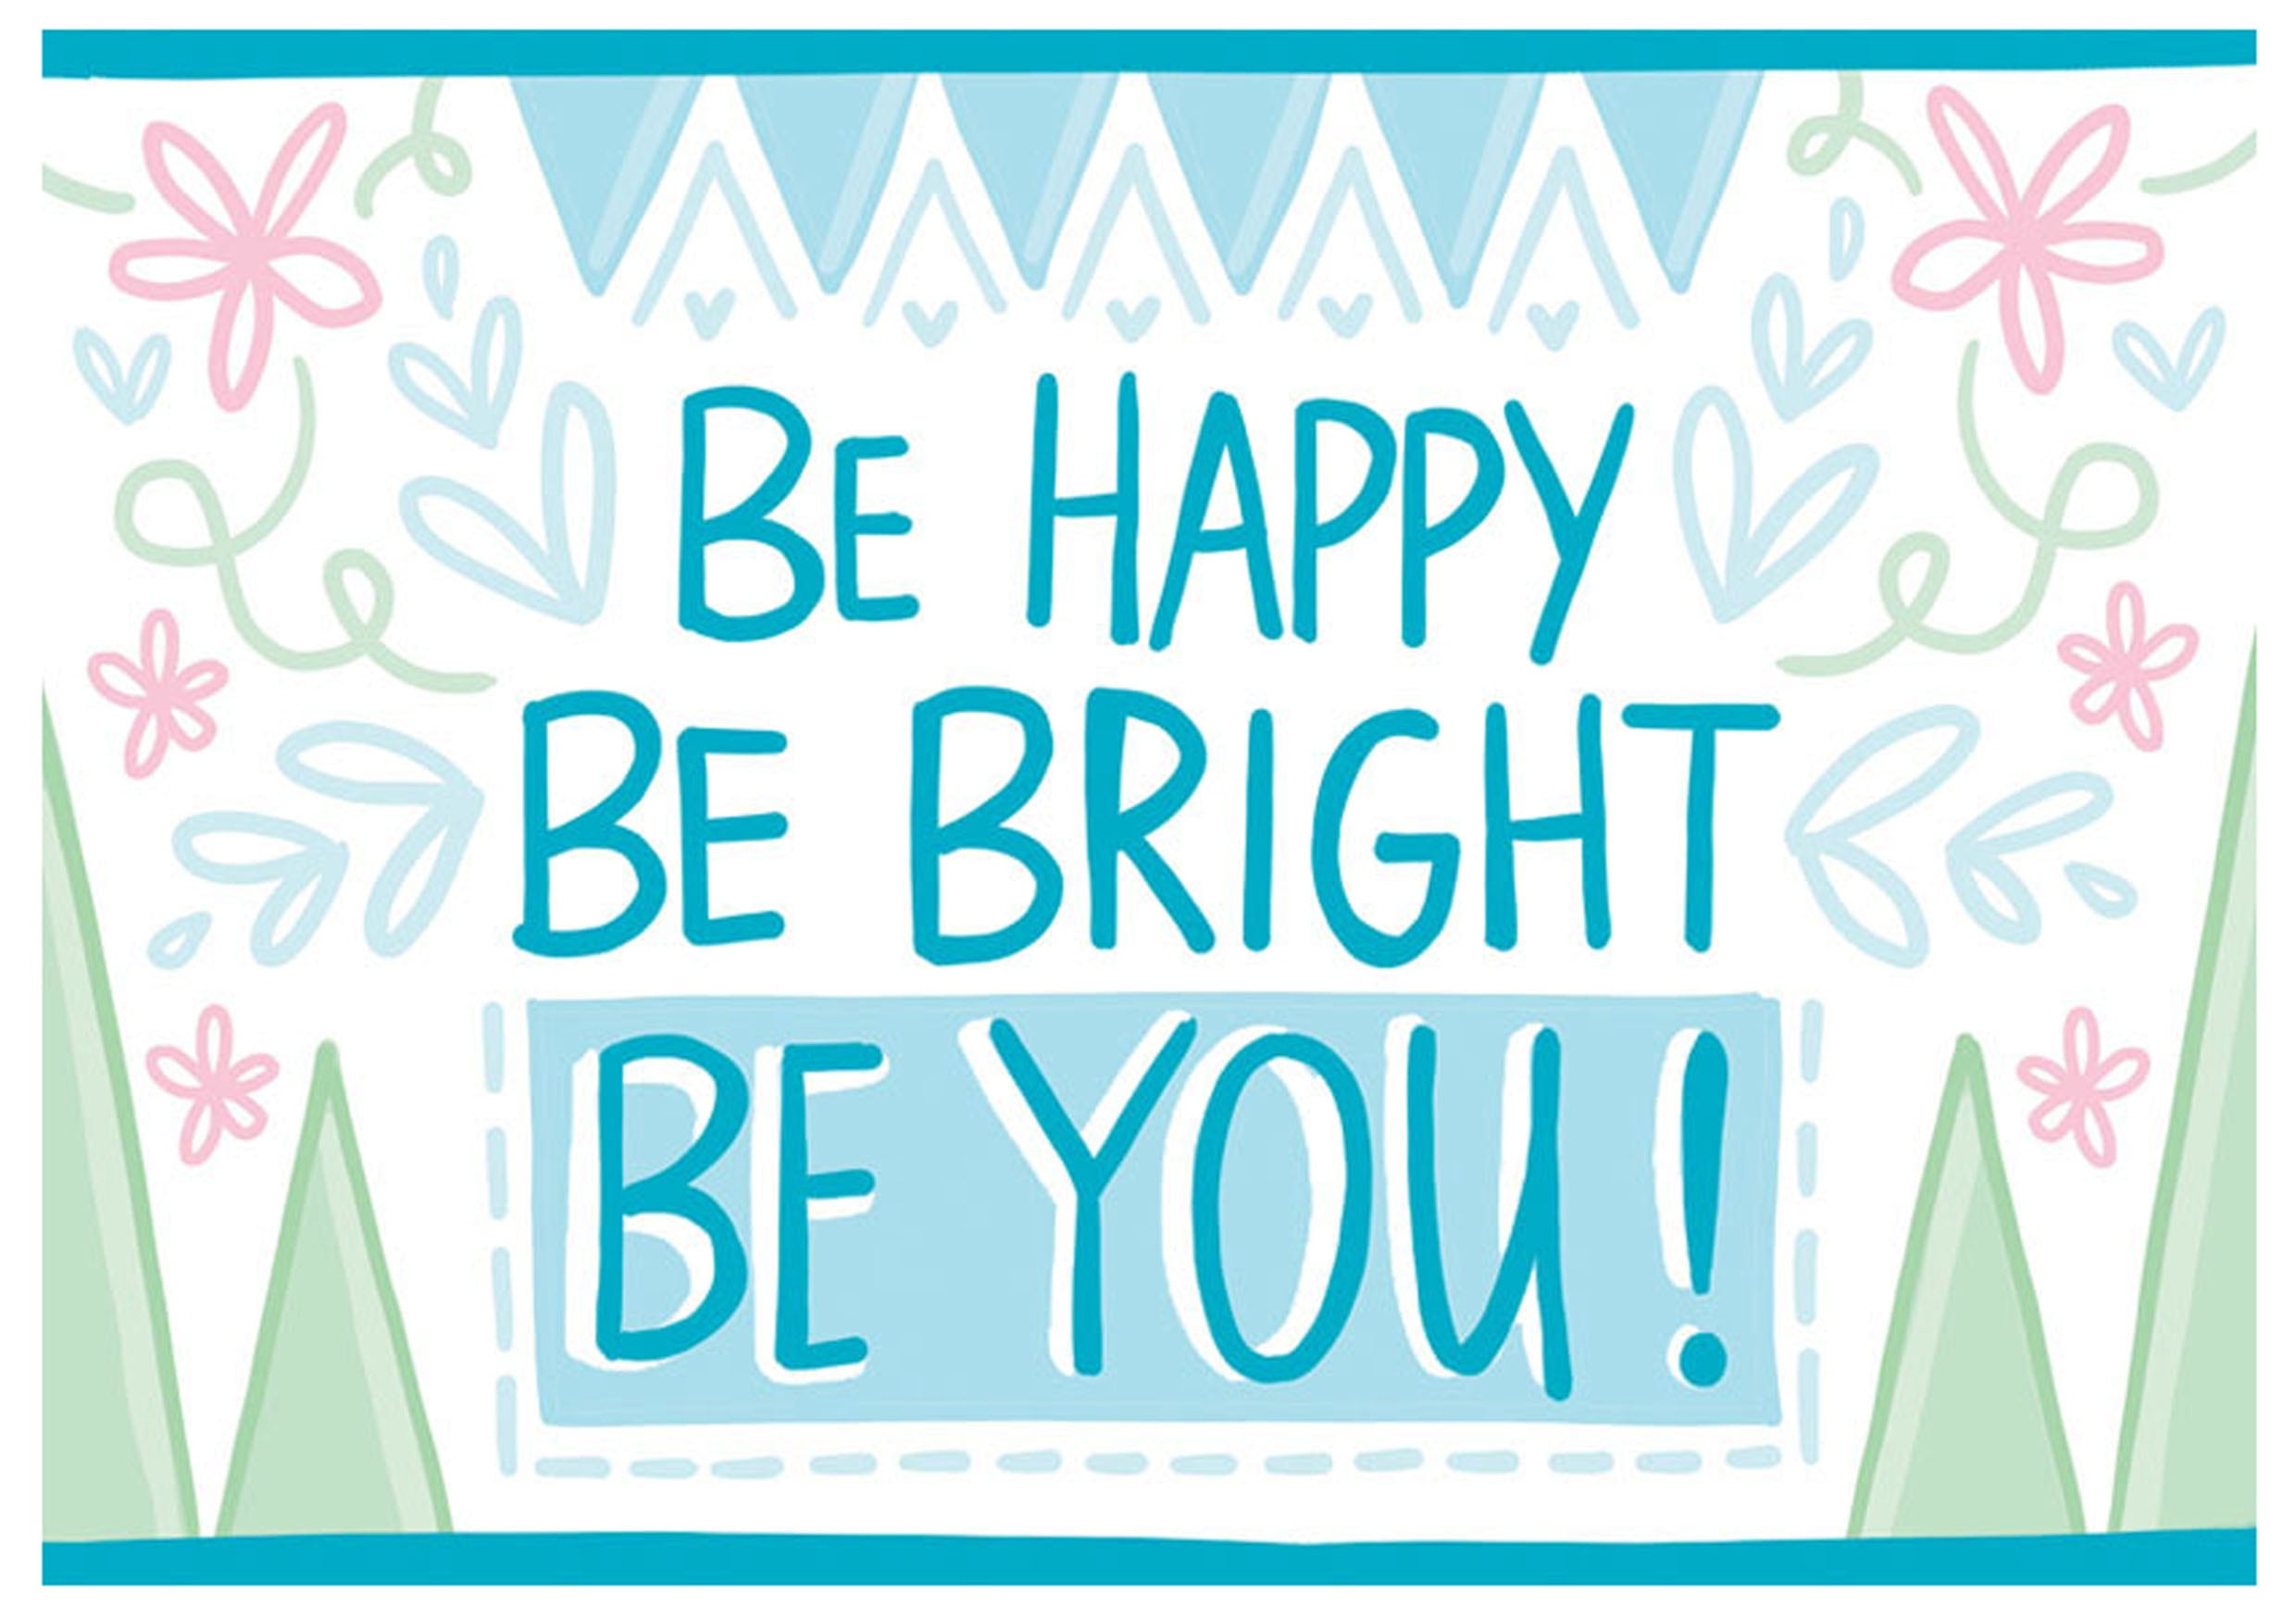 Be happy. Be bright. Be you. Encouraging quote. Vector isolated